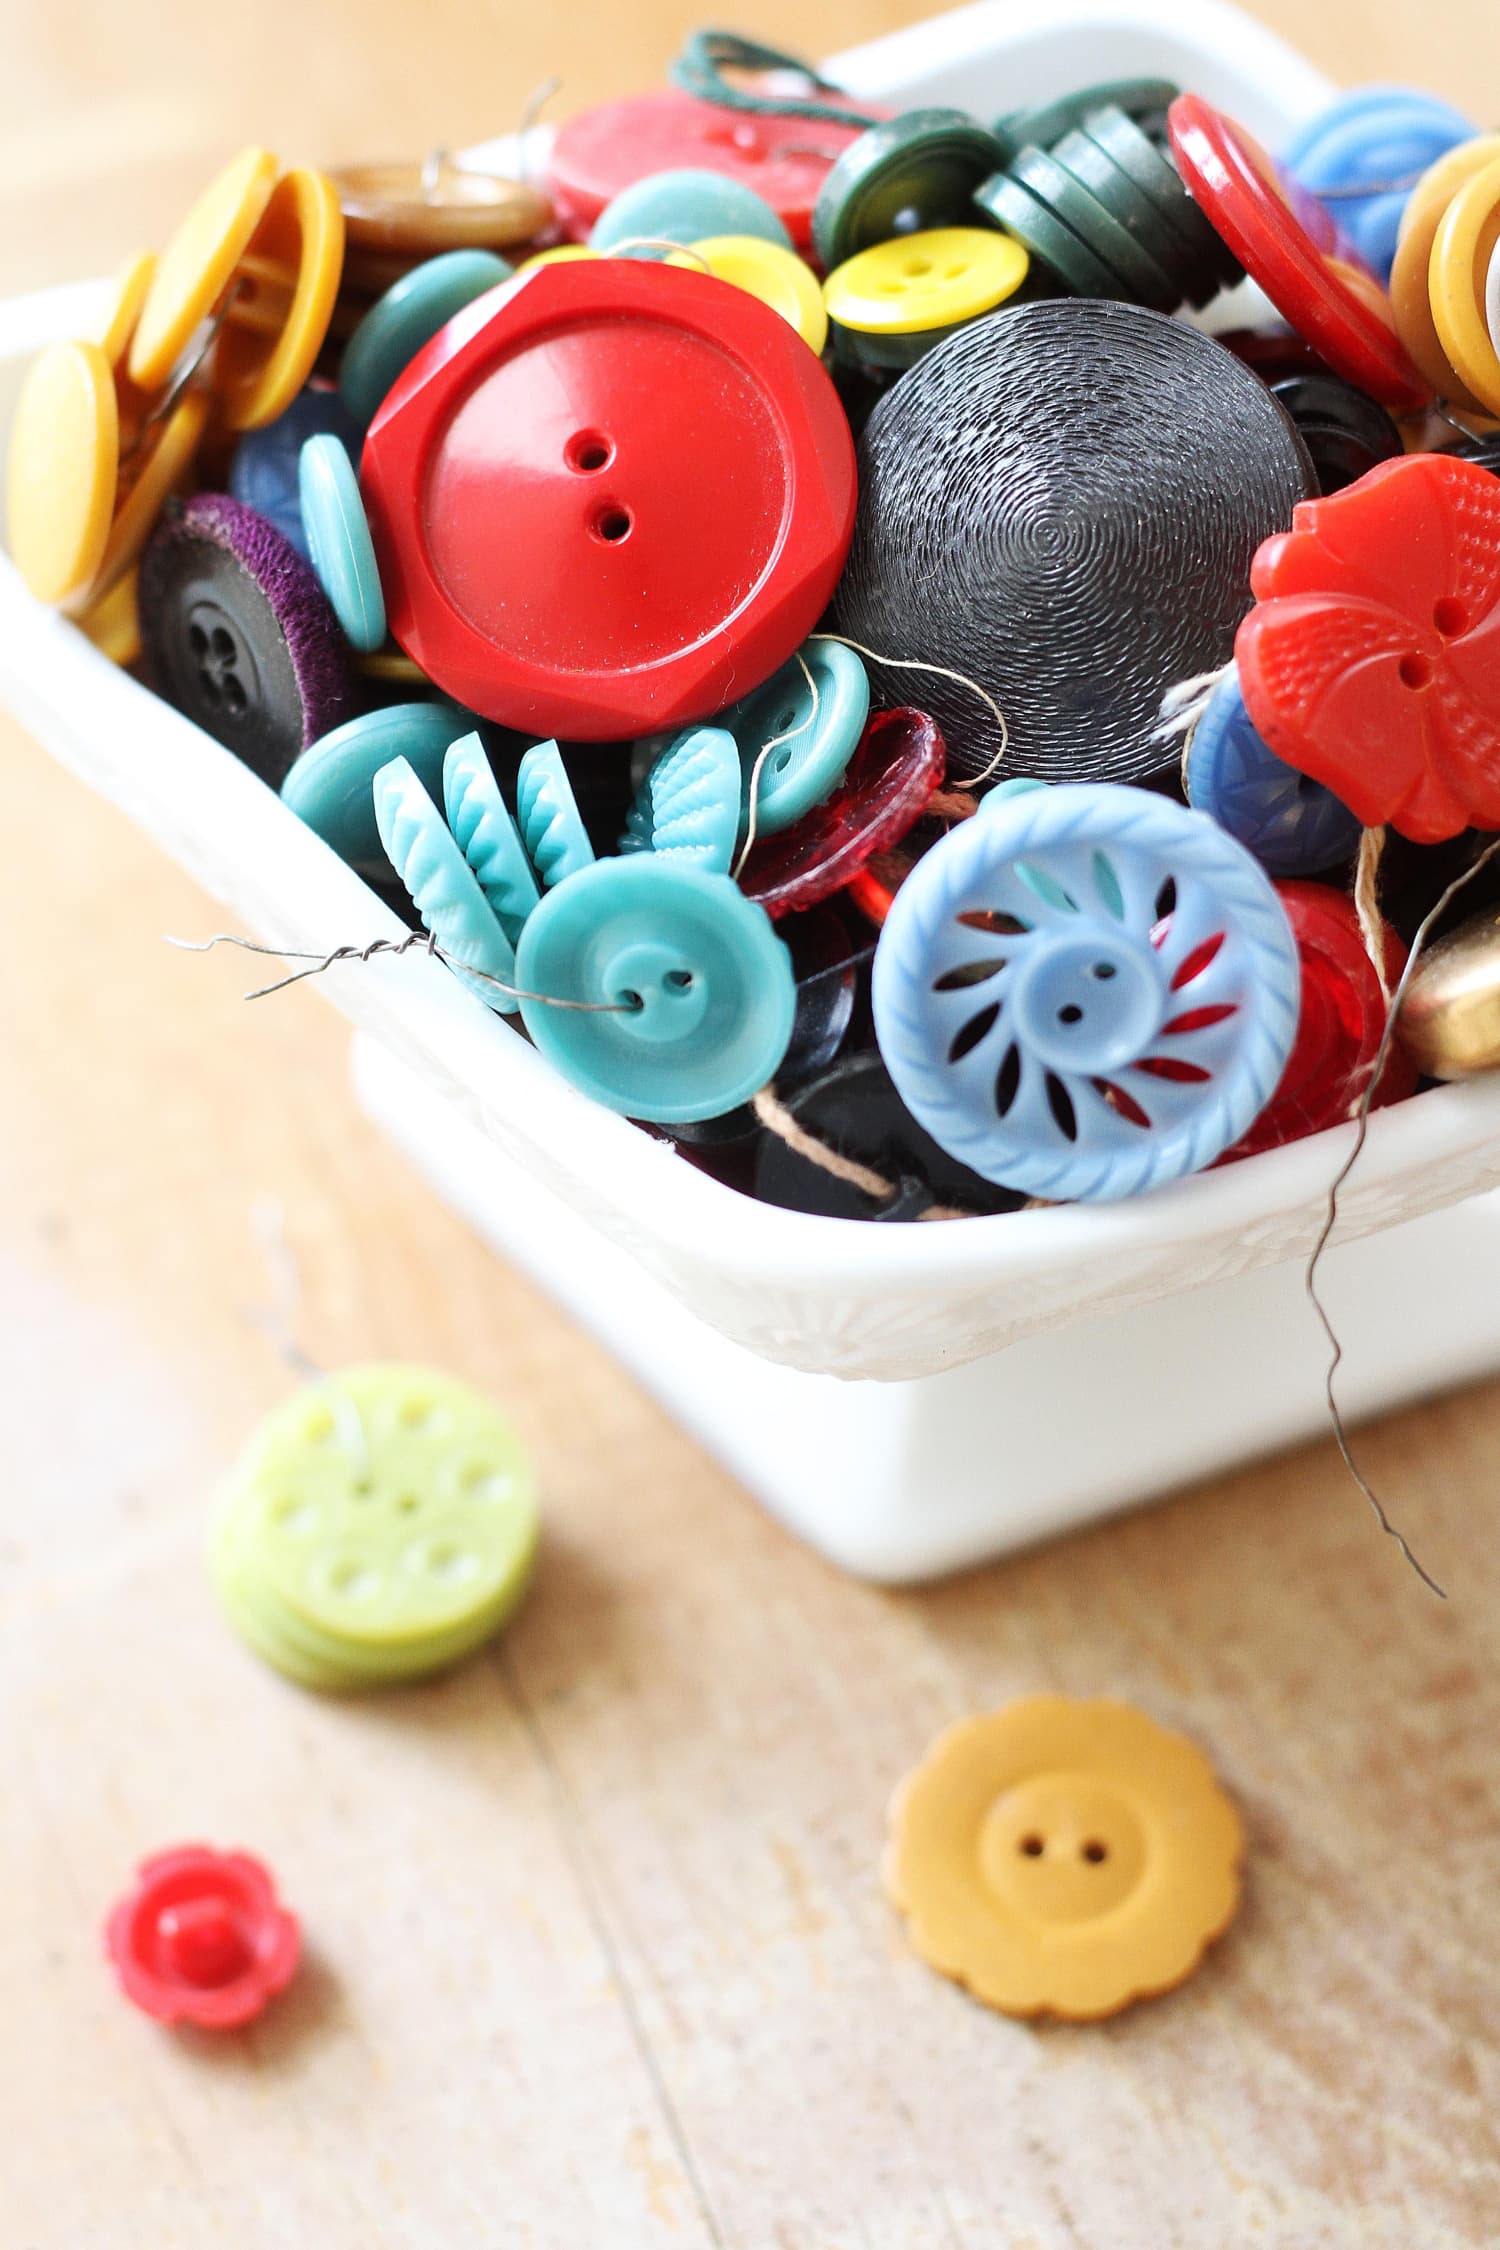 Smart & Simple: The Best Way to Sew on a Button